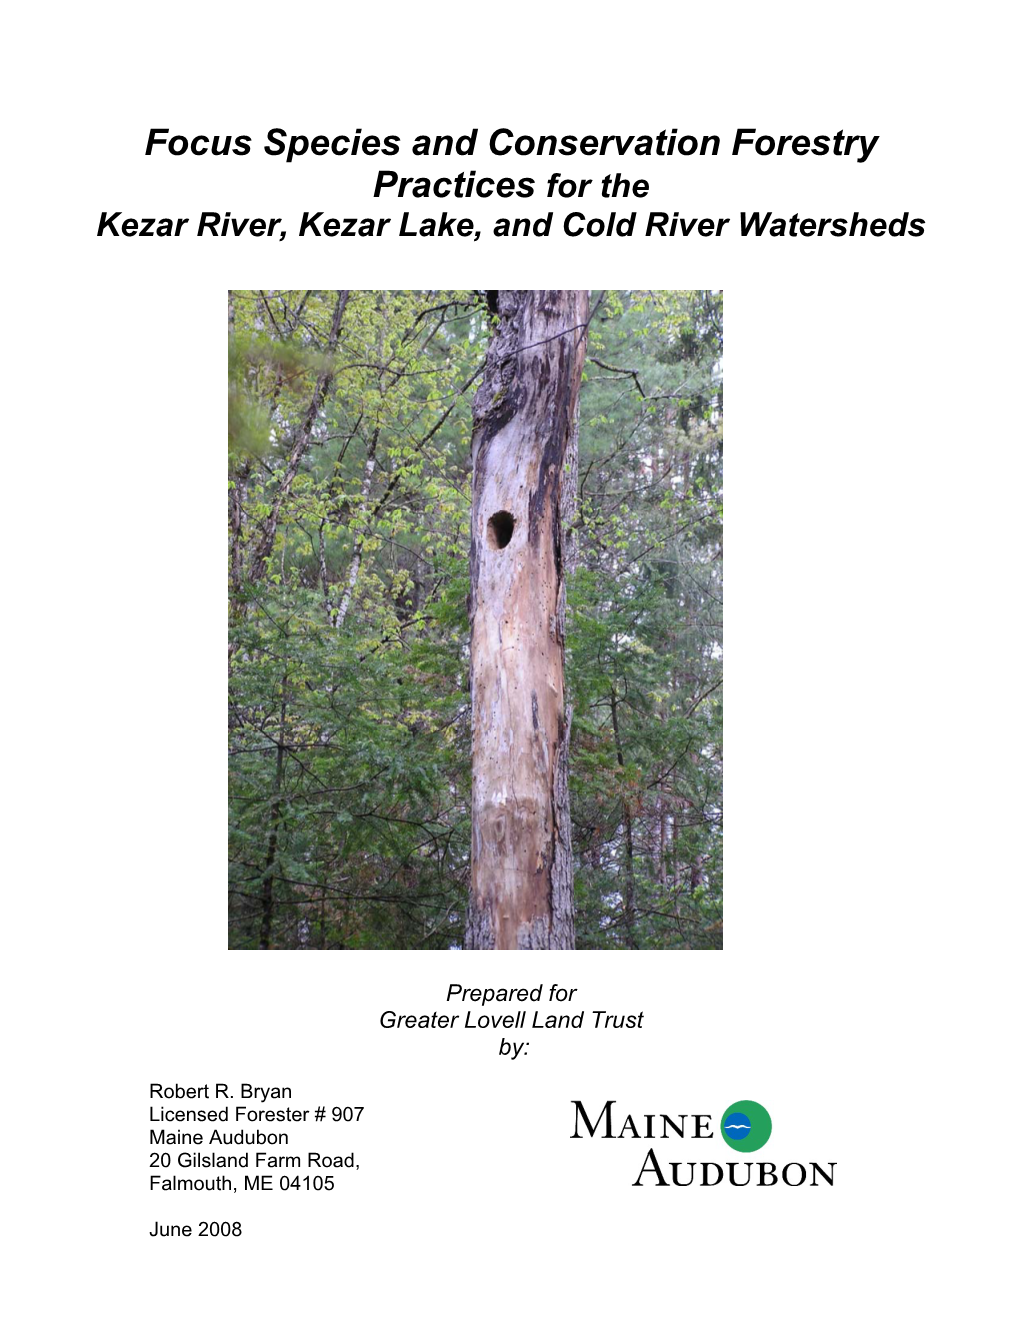 Focus Species and Conservation Forestry Practices for the Kezar River, Kezar Lake, and Cold River Watersheds